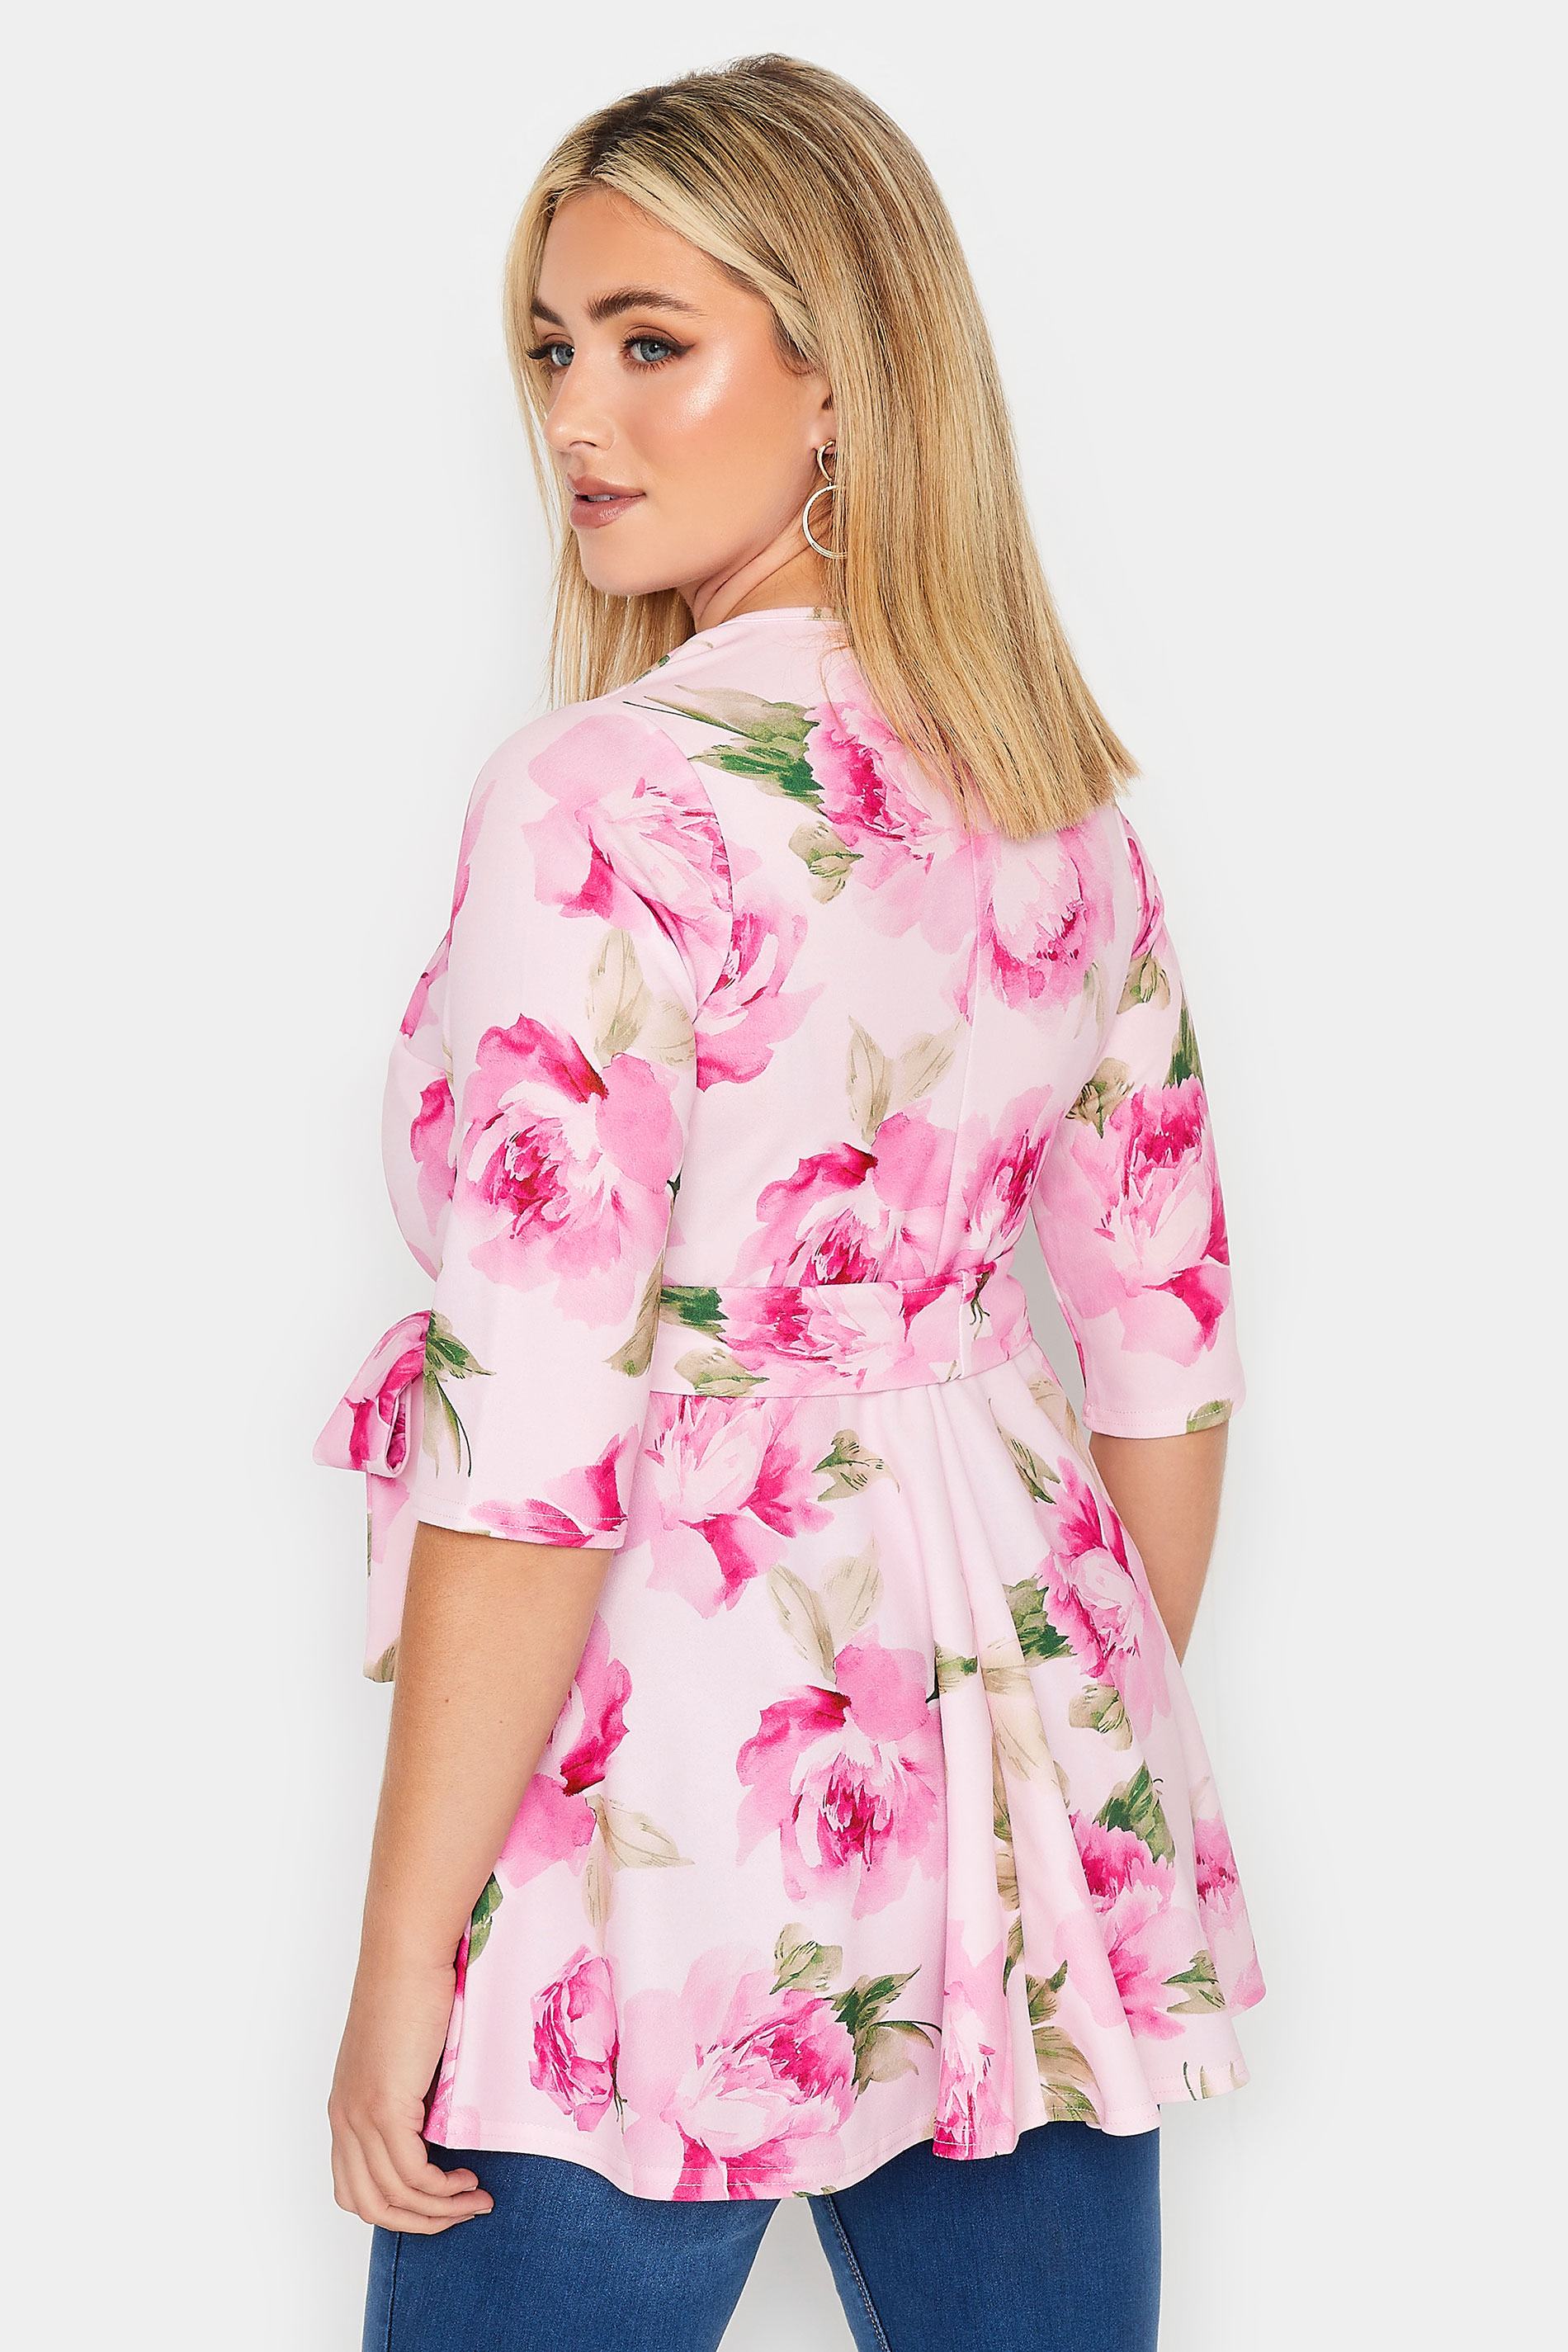 YOURS LONDON Plus Size Pink Floral Scoop Neck Peplum Top | Yours Clothing 3